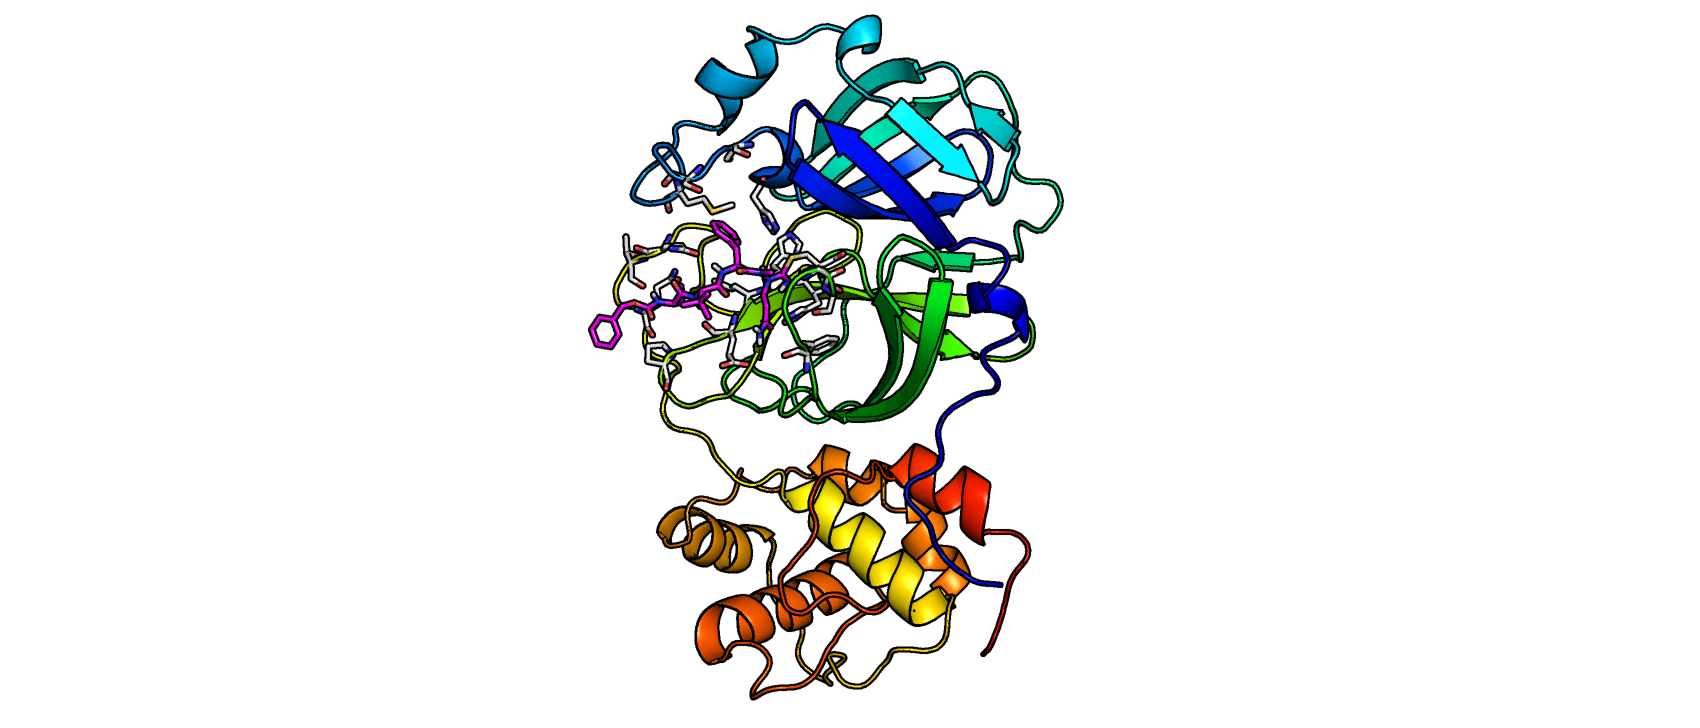 The SARS-CoV-2 main protease with one of the newly developed inhibitors in the active center.